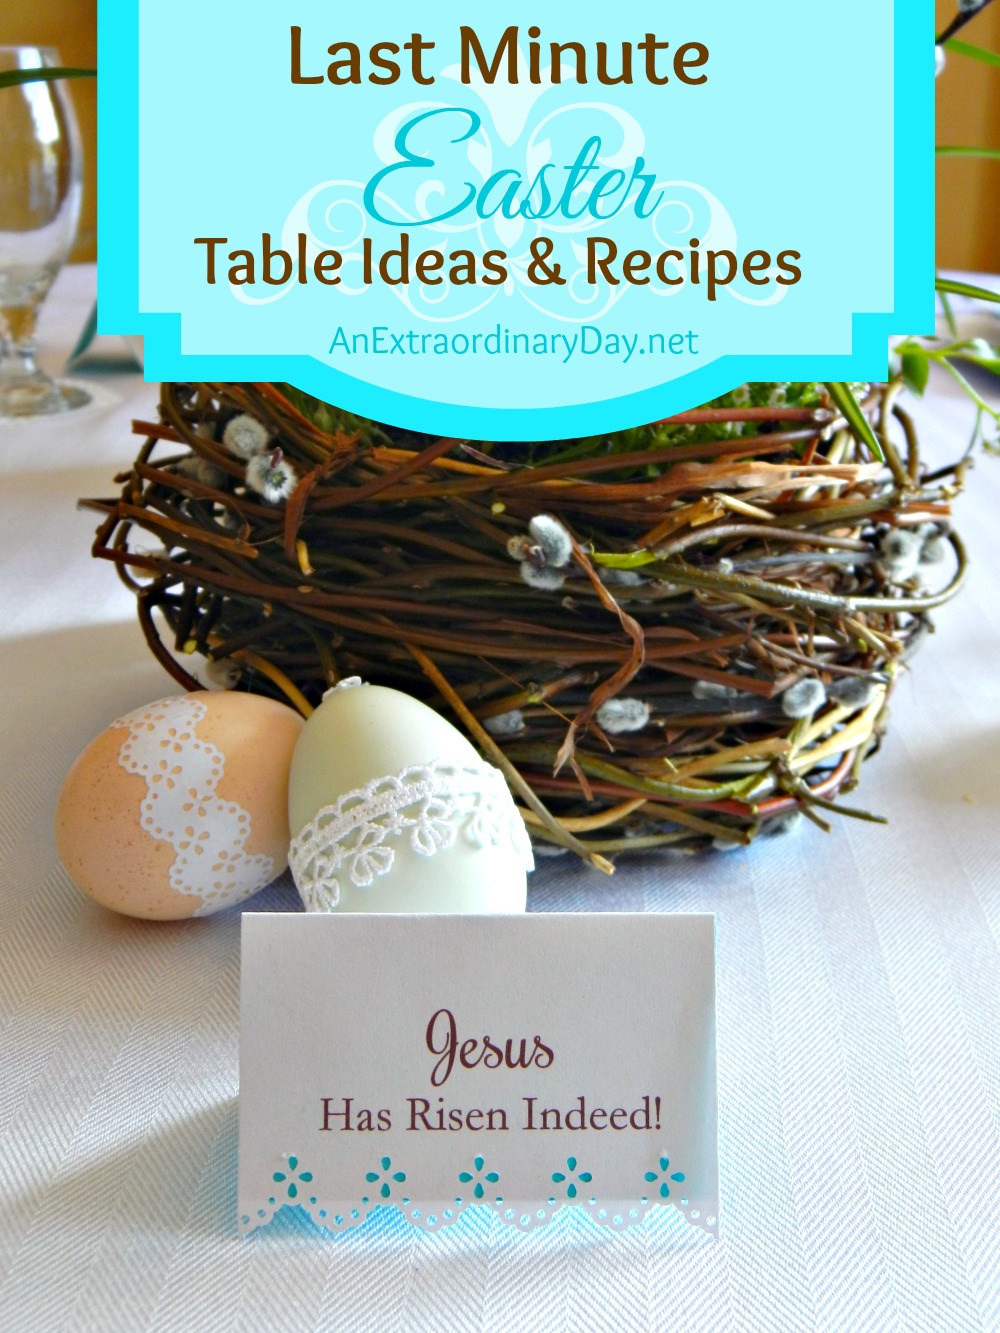 Here are a few last minute ideas for your Easter table, plus a few recipes and a printable for printing out meaningful Easter place cards.